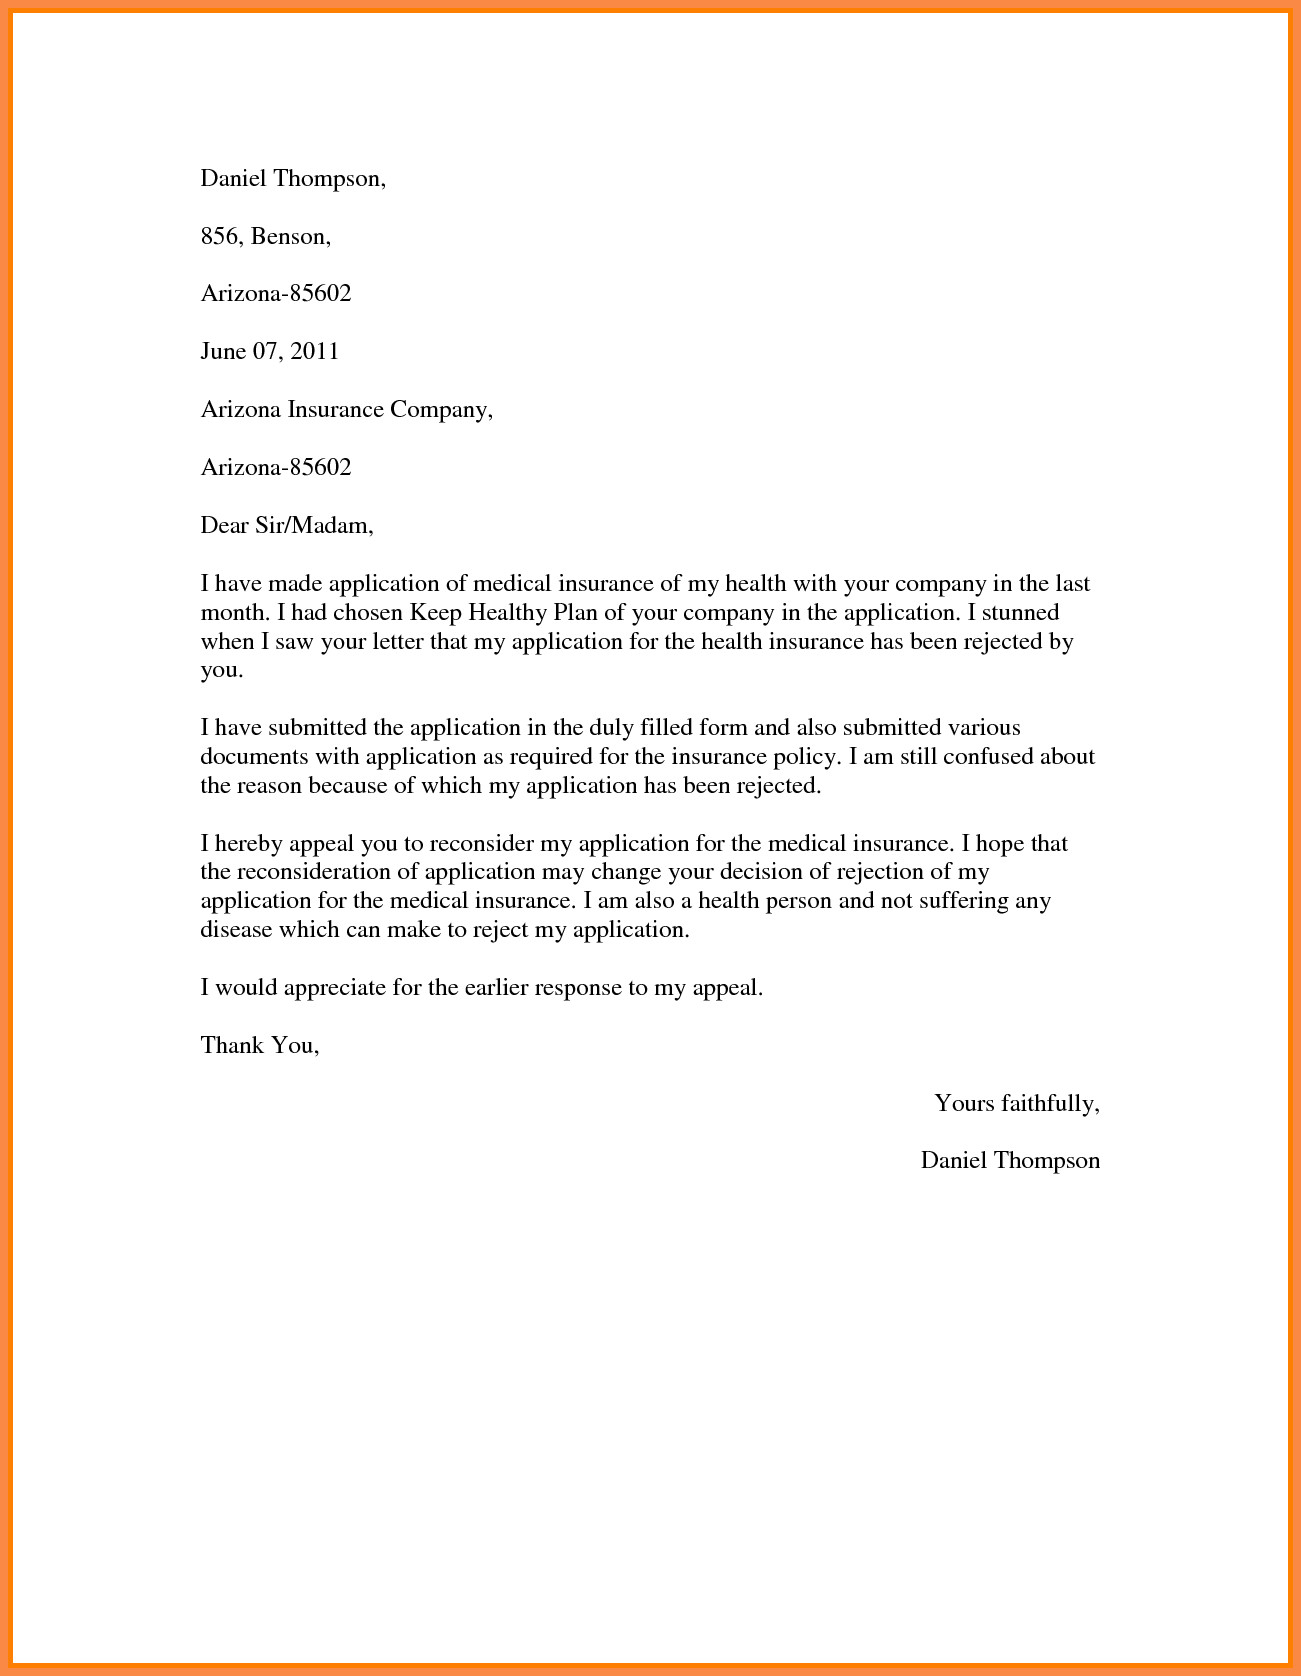 timeshare cancellation letter template Collection-Westgate Timeshare Cancellation Letter Exceptional Contract Cancellation Letter Arch Times 12-h